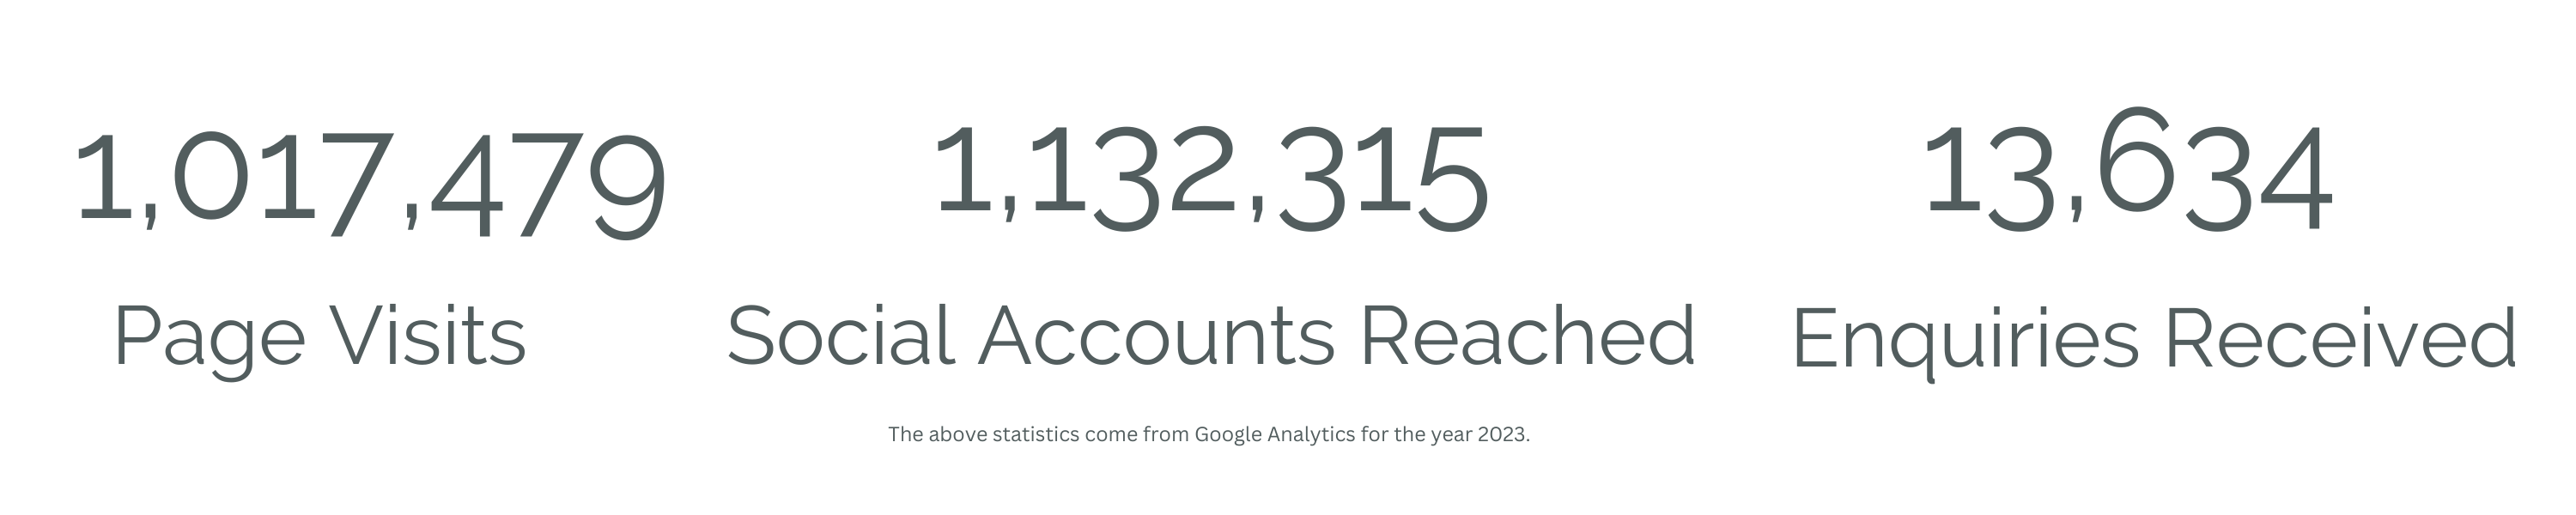 The above statistics come from Google Analytics for the year 2023 containing the number of page visits, social accounts reached and enquiries received. 